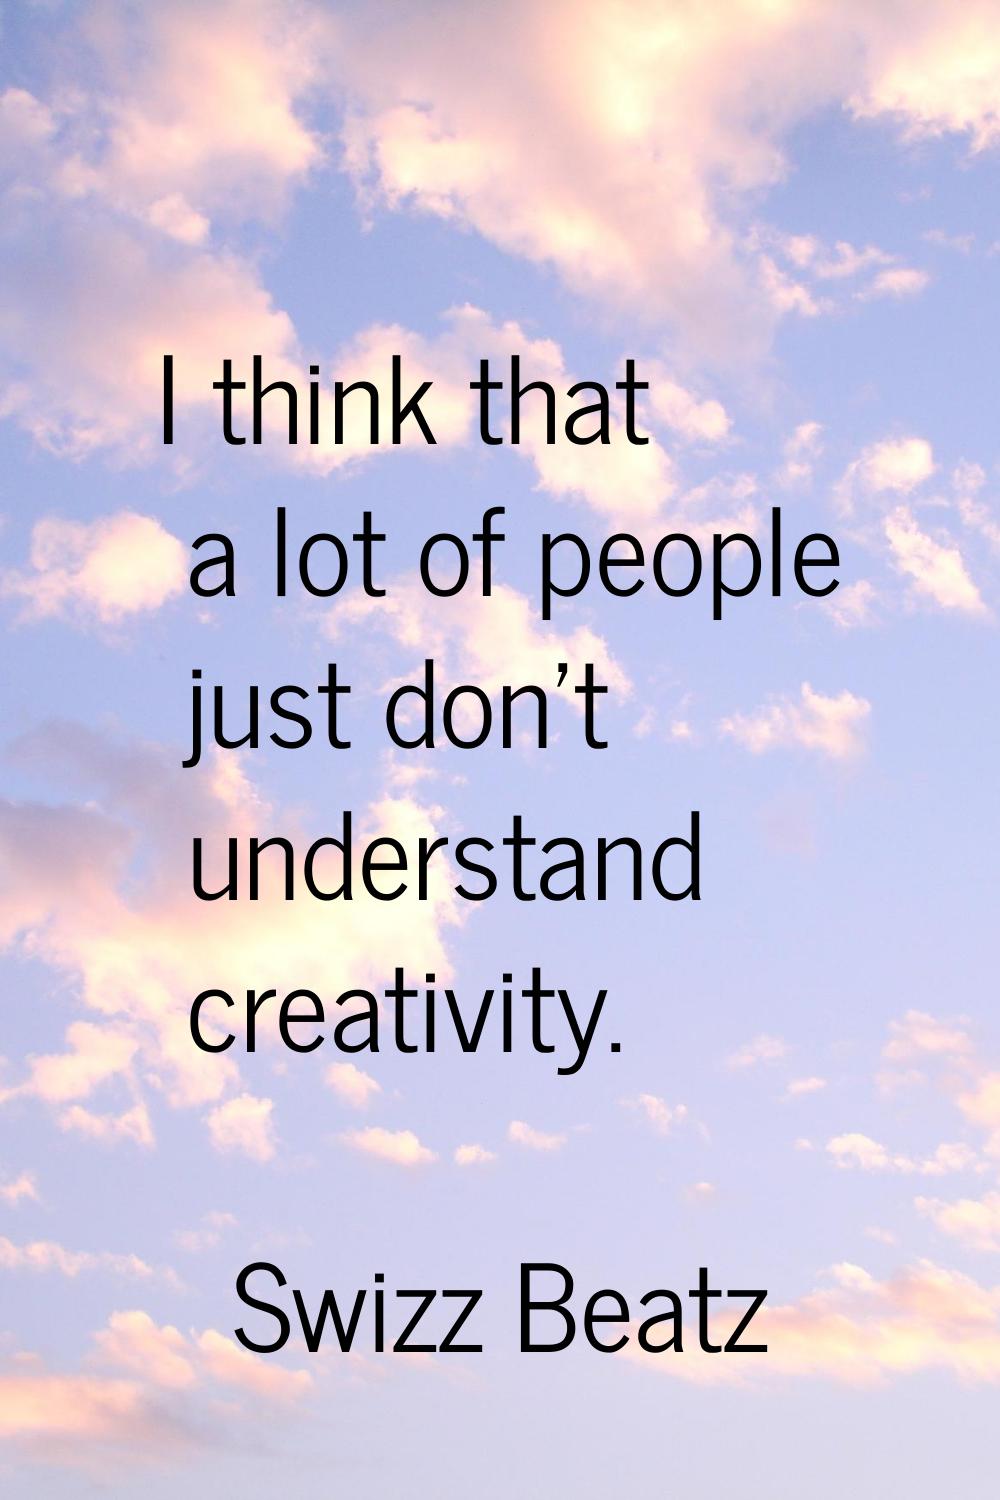 I think that a lot of people just don't understand creativity.